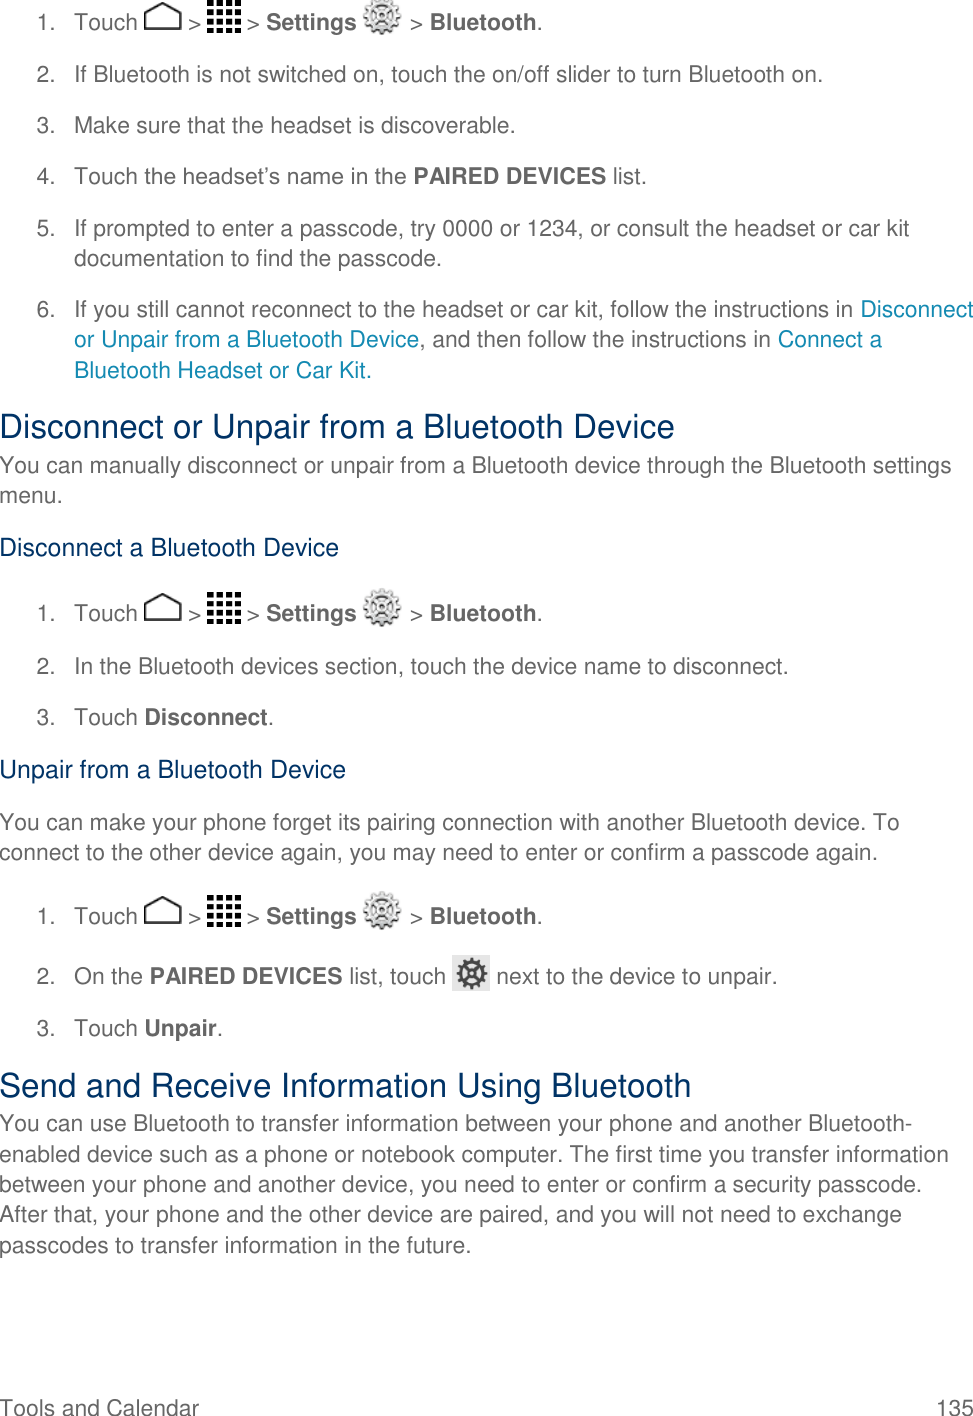 Tools and Calendar  135 1.  Touch   &gt;   &gt; Settings   &gt; Bluetooth. 2.  If Bluetooth is not switched on, touch the on/off slider to turn Bluetooth on. 3.  Make sure that the headset is discoverable. 4.  Touch the headset’s name in the PAIRED DEVICES list. 5.  If prompted to enter a passcode, try 0000 or 1234, or consult the headset or car kit documentation to find the passcode. 6.  If you still cannot reconnect to the headset or car kit, follow the instructions in Disconnect or Unpair from a Bluetooth Device, and then follow the instructions in Connect a Bluetooth Headset or Car Kit. Disconnect or Unpair from a Bluetooth Device You can manually disconnect or unpair from a Bluetooth device through the Bluetooth settings menu. Disconnect a Bluetooth Device 1.  Touch   &gt;   &gt; Settings   &gt; Bluetooth. 2.  In the Bluetooth devices section, touch the device name to disconnect. 3.  Touch Disconnect. Unpair from a Bluetooth Device You can make your phone forget its pairing connection with another Bluetooth device. To connect to the other device again, you may need to enter or confirm a passcode again. 1.  Touch   &gt;   &gt; Settings   &gt; Bluetooth. 2.  On the PAIRED DEVICES list, touch   next to the device to unpair. 3.  Touch Unpair. Send and Receive Information Using Bluetooth You can use Bluetooth to transfer information between your phone and another Bluetooth-enabled device such as a phone or notebook computer. The first time you transfer information between your phone and another device, you need to enter or confirm a security passcode. After that, your phone and the other device are paired, and you will not need to exchange passcodes to transfer information in the future. 